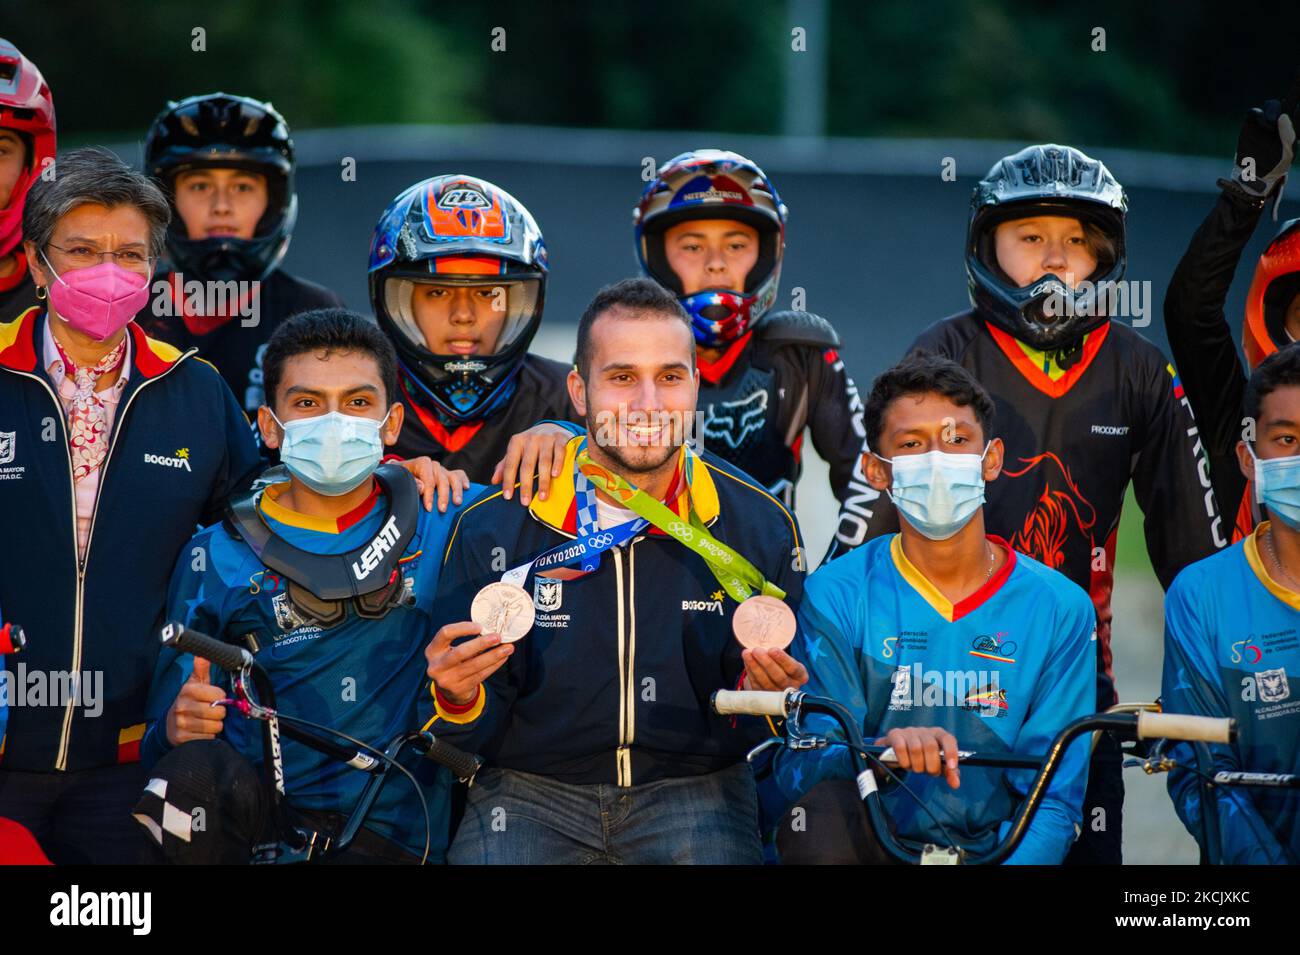 Carlos Ramirez poses with Bogota's BMX team for a photo during the name inauguration of the Carlos Ramirez BMX track named after Carlos Ramirez bronze Olympic Medal winner during the Tokyo 2020+1 Olympics, in Bogota, Colombia, on August 18, 2021. (Photo by Sebastian Barros/NurPhoto) Stock Photo